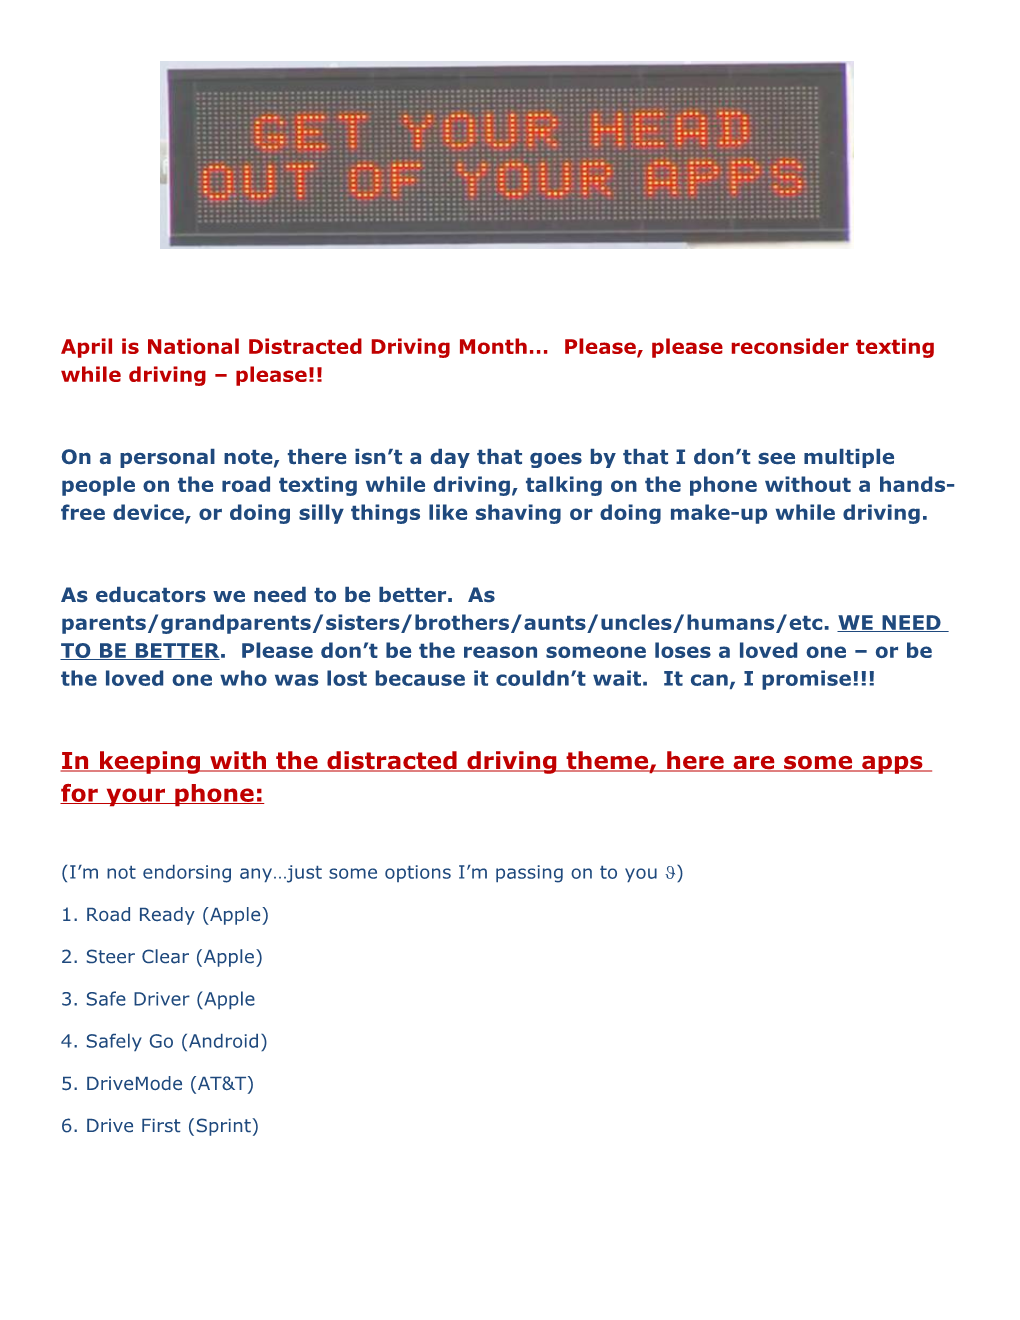 April Is National Distracted Driving Month Please, Please Reconsider Texting While Driving